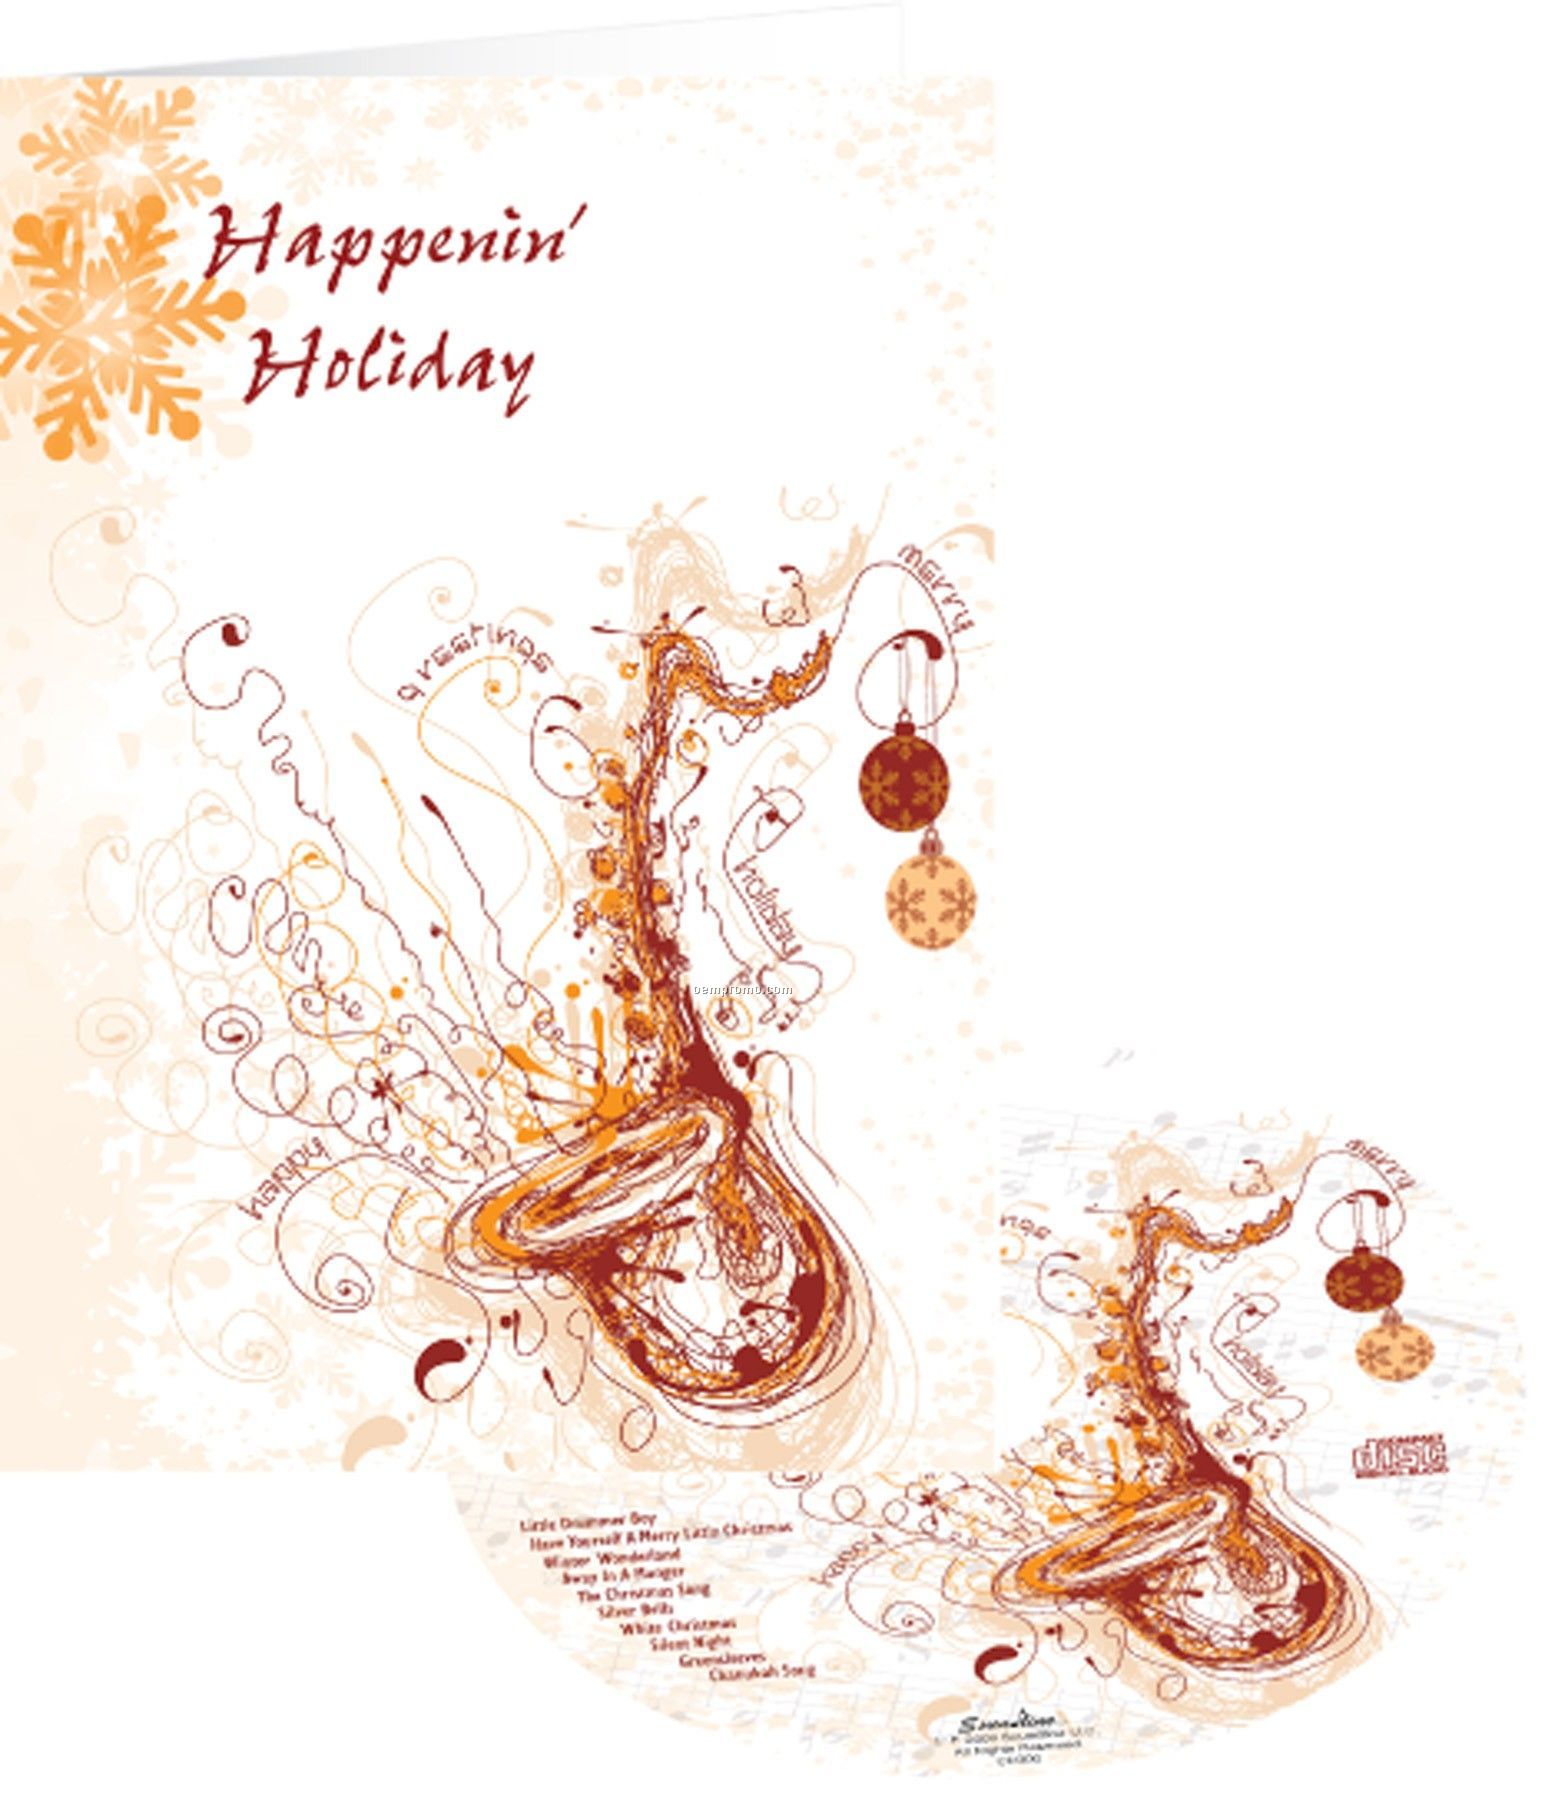 Happenin' Sax Holiday Greeting Card With Matching CD